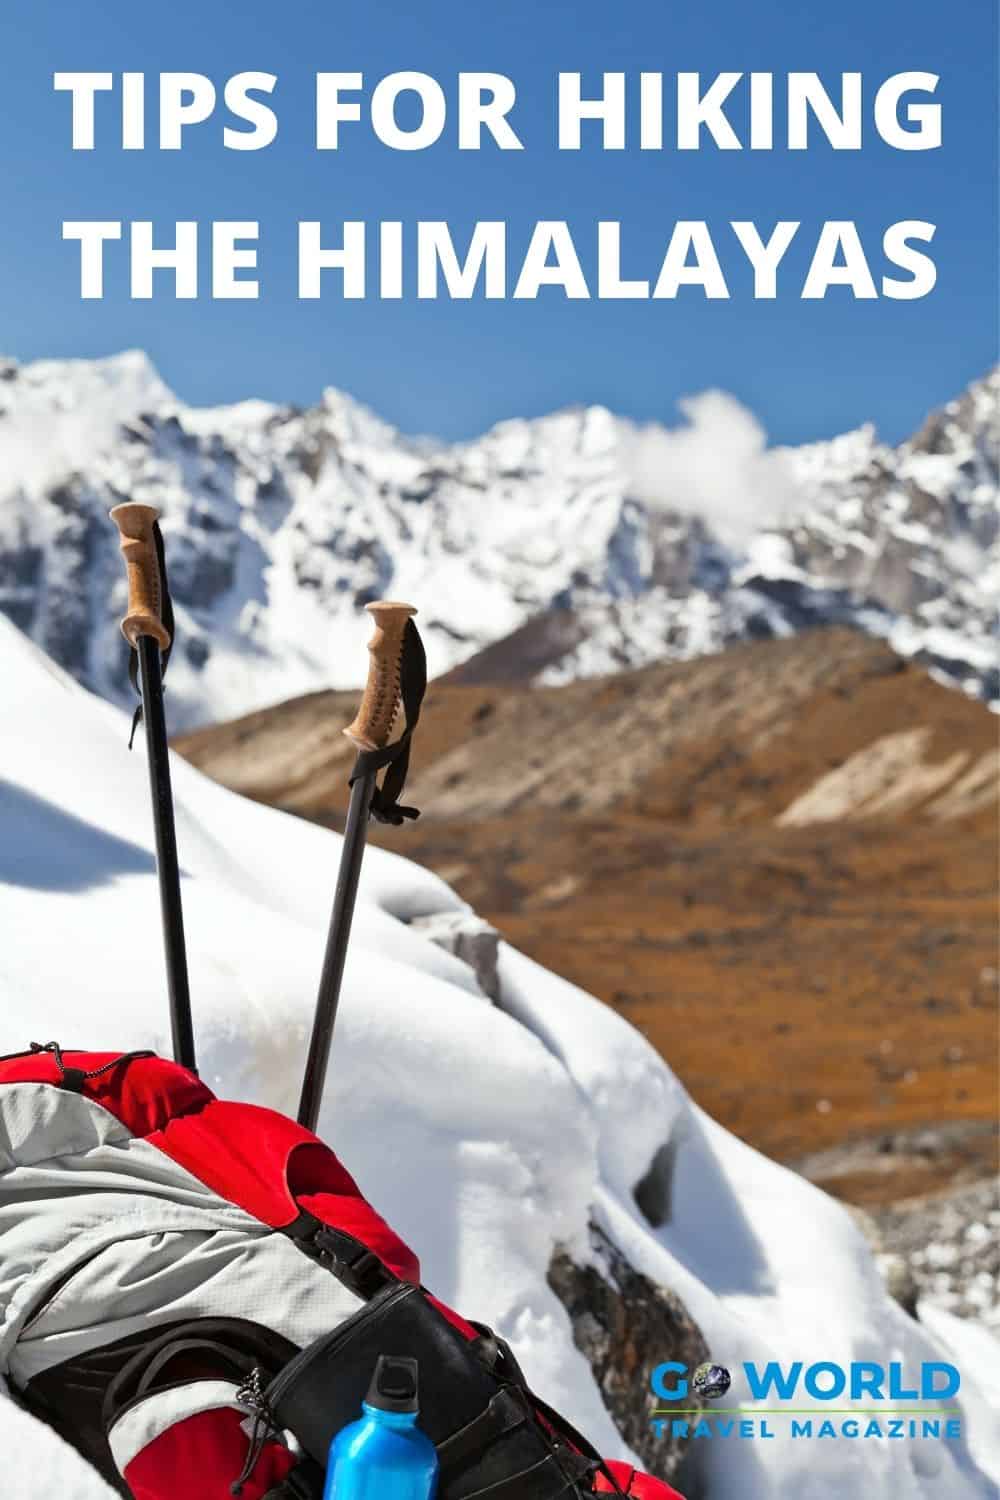 Hiking in the Himalayas is an amazing life-changing experience but you need to be prepared. Learn from the tips of an unprepared first-timer. #Himalayas #Nepal #hikinginthehimalayas